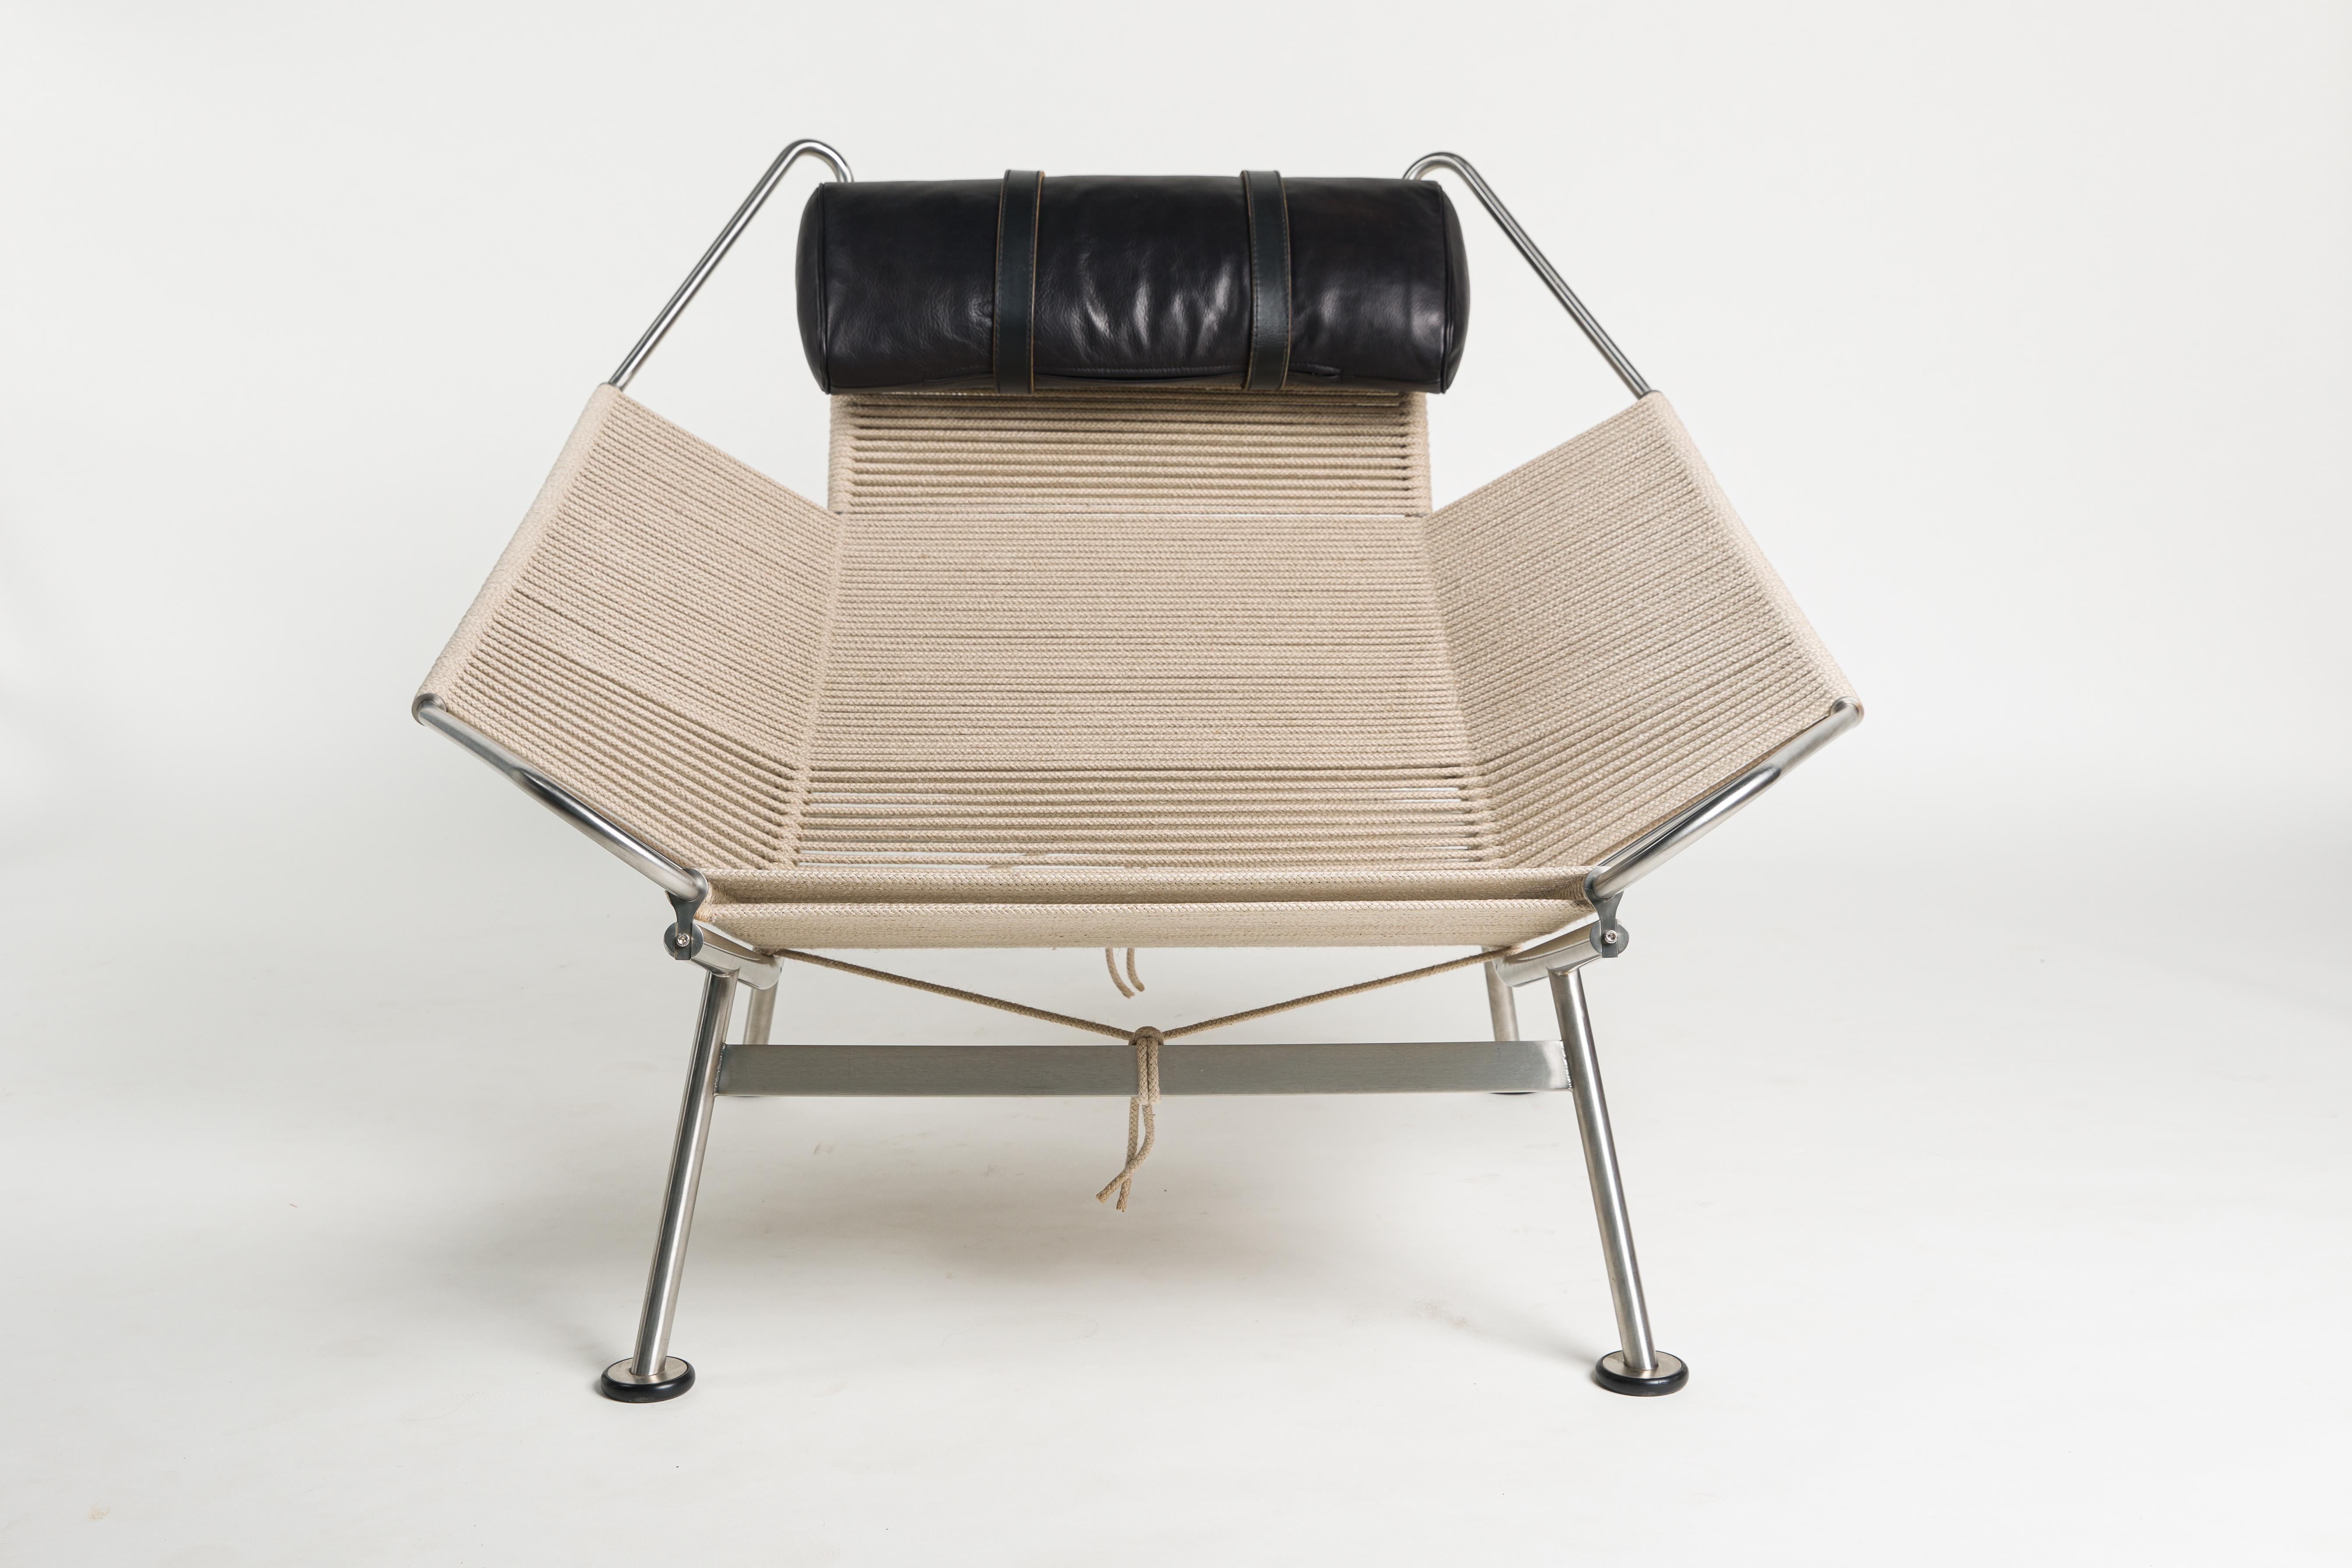 Flag Halyard chair by Hans J. Wegner (1914 - 2007) with brushed steel frame.
Seat, back, headrest and armrest surfaces mounted with light-coloured flag halyard. Pillow with black Elegance leather. Accompanying long-haired sheepskin included.